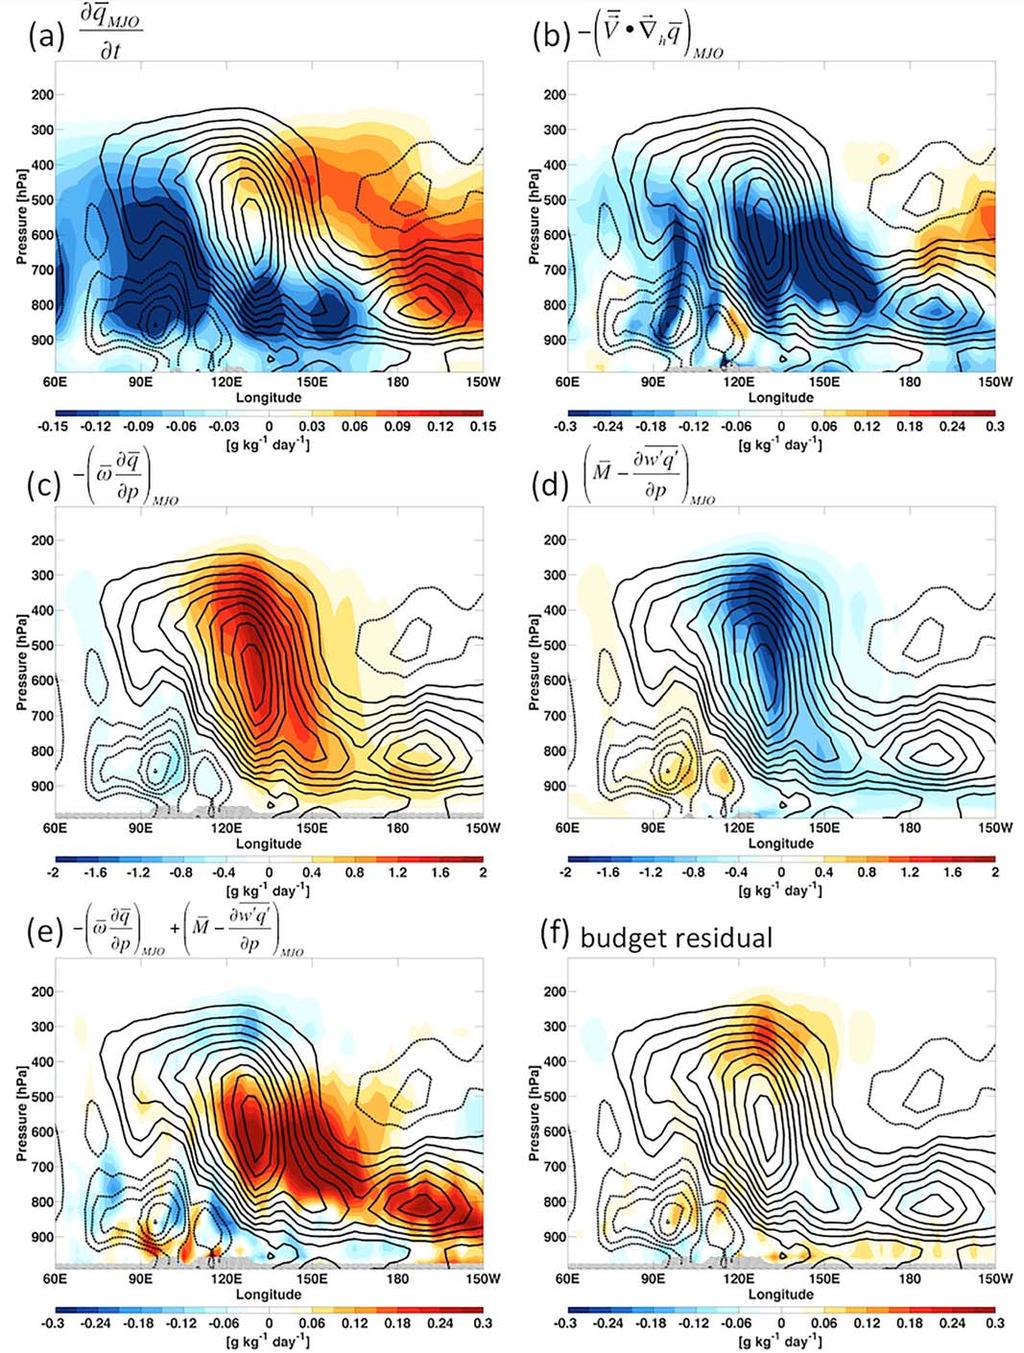 Figure 11. Longitude-height sections of latitudinally averaged (5 N25 S) composite intraseasonal moisture budget terms (shading) for the 43CO 2 simulation.